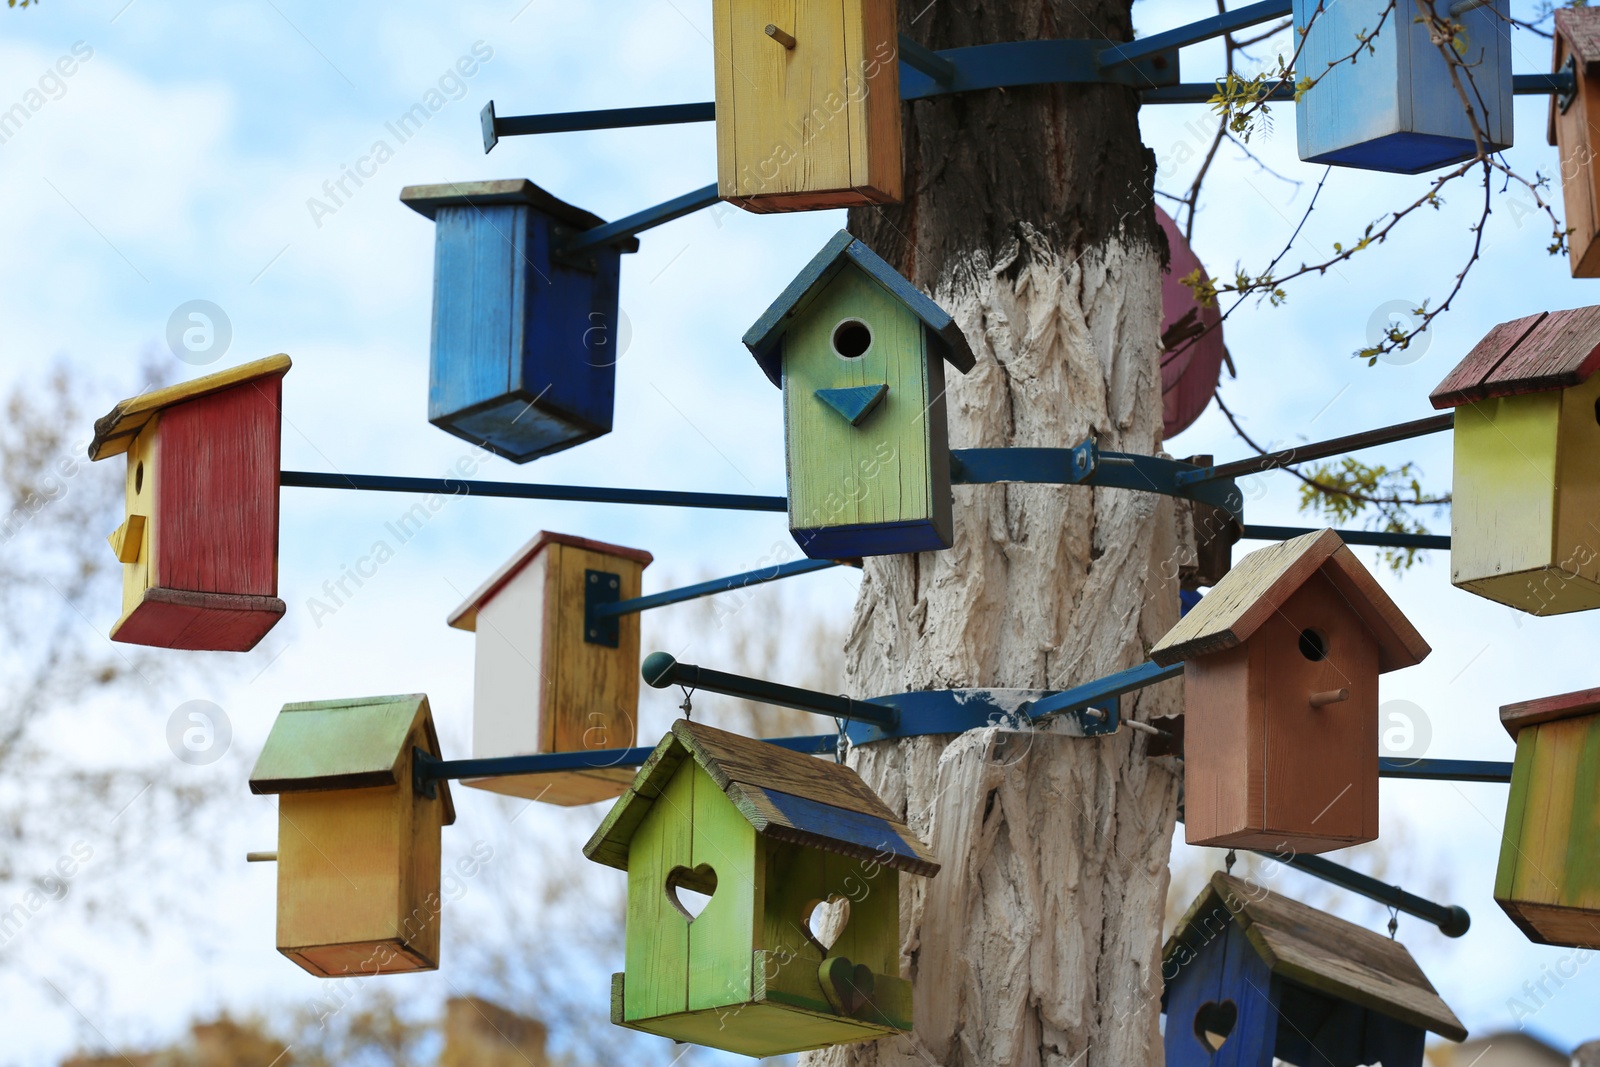 Photo of Lots of colorful wooden bird houses on tree outdoors